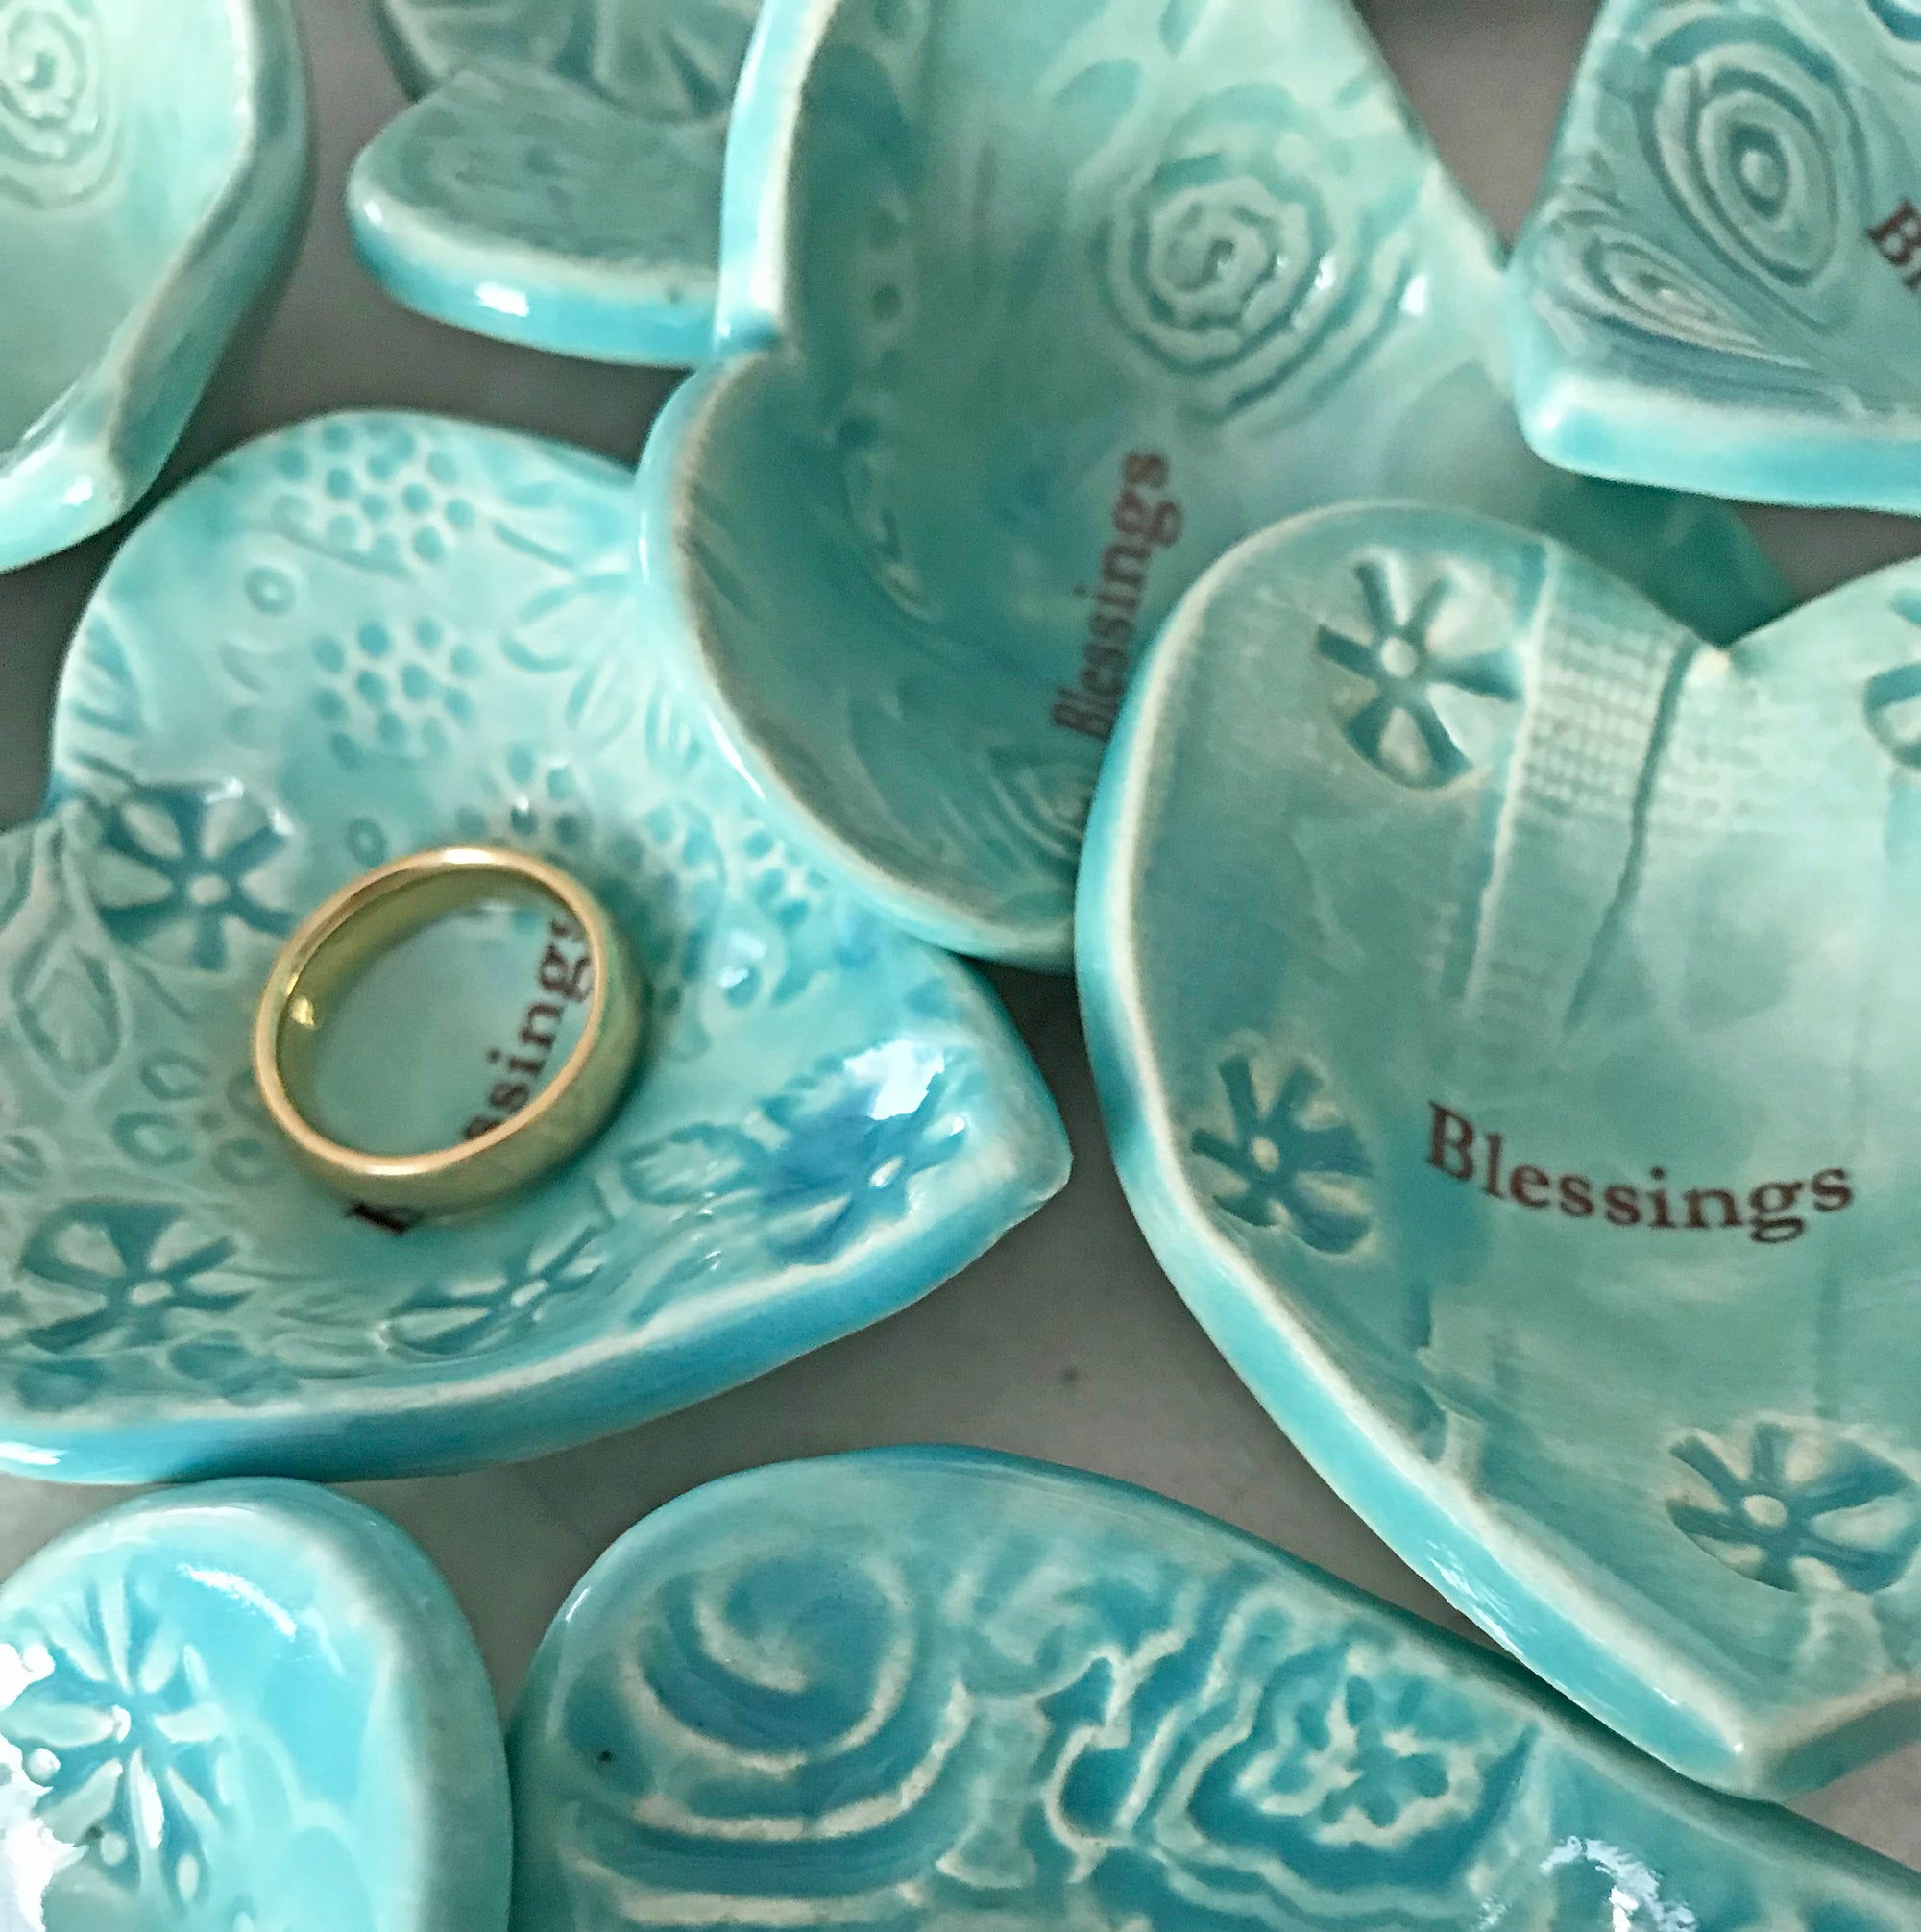 Giving Heart with the word "Blessings" is a unique and heartfelt gift .  Comes with its own gift bag and story card.